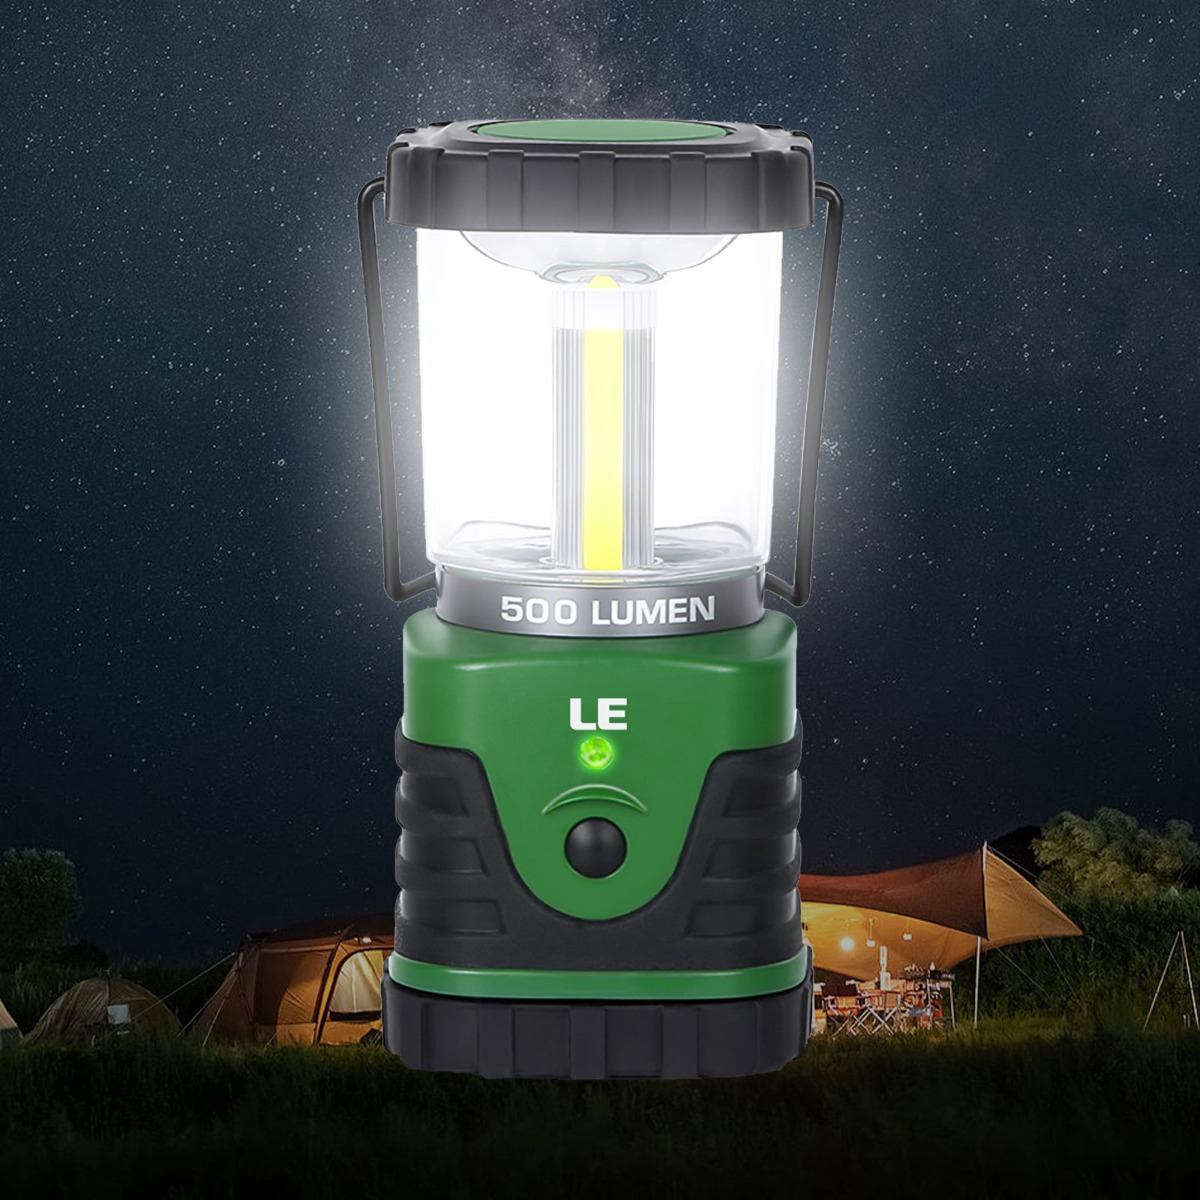 Lepro LED Camping Lantern Battery Powered, Super Bright, Collapsible, Ipx4 Water Resistant, Outdoor Portable Lights for Emergenc